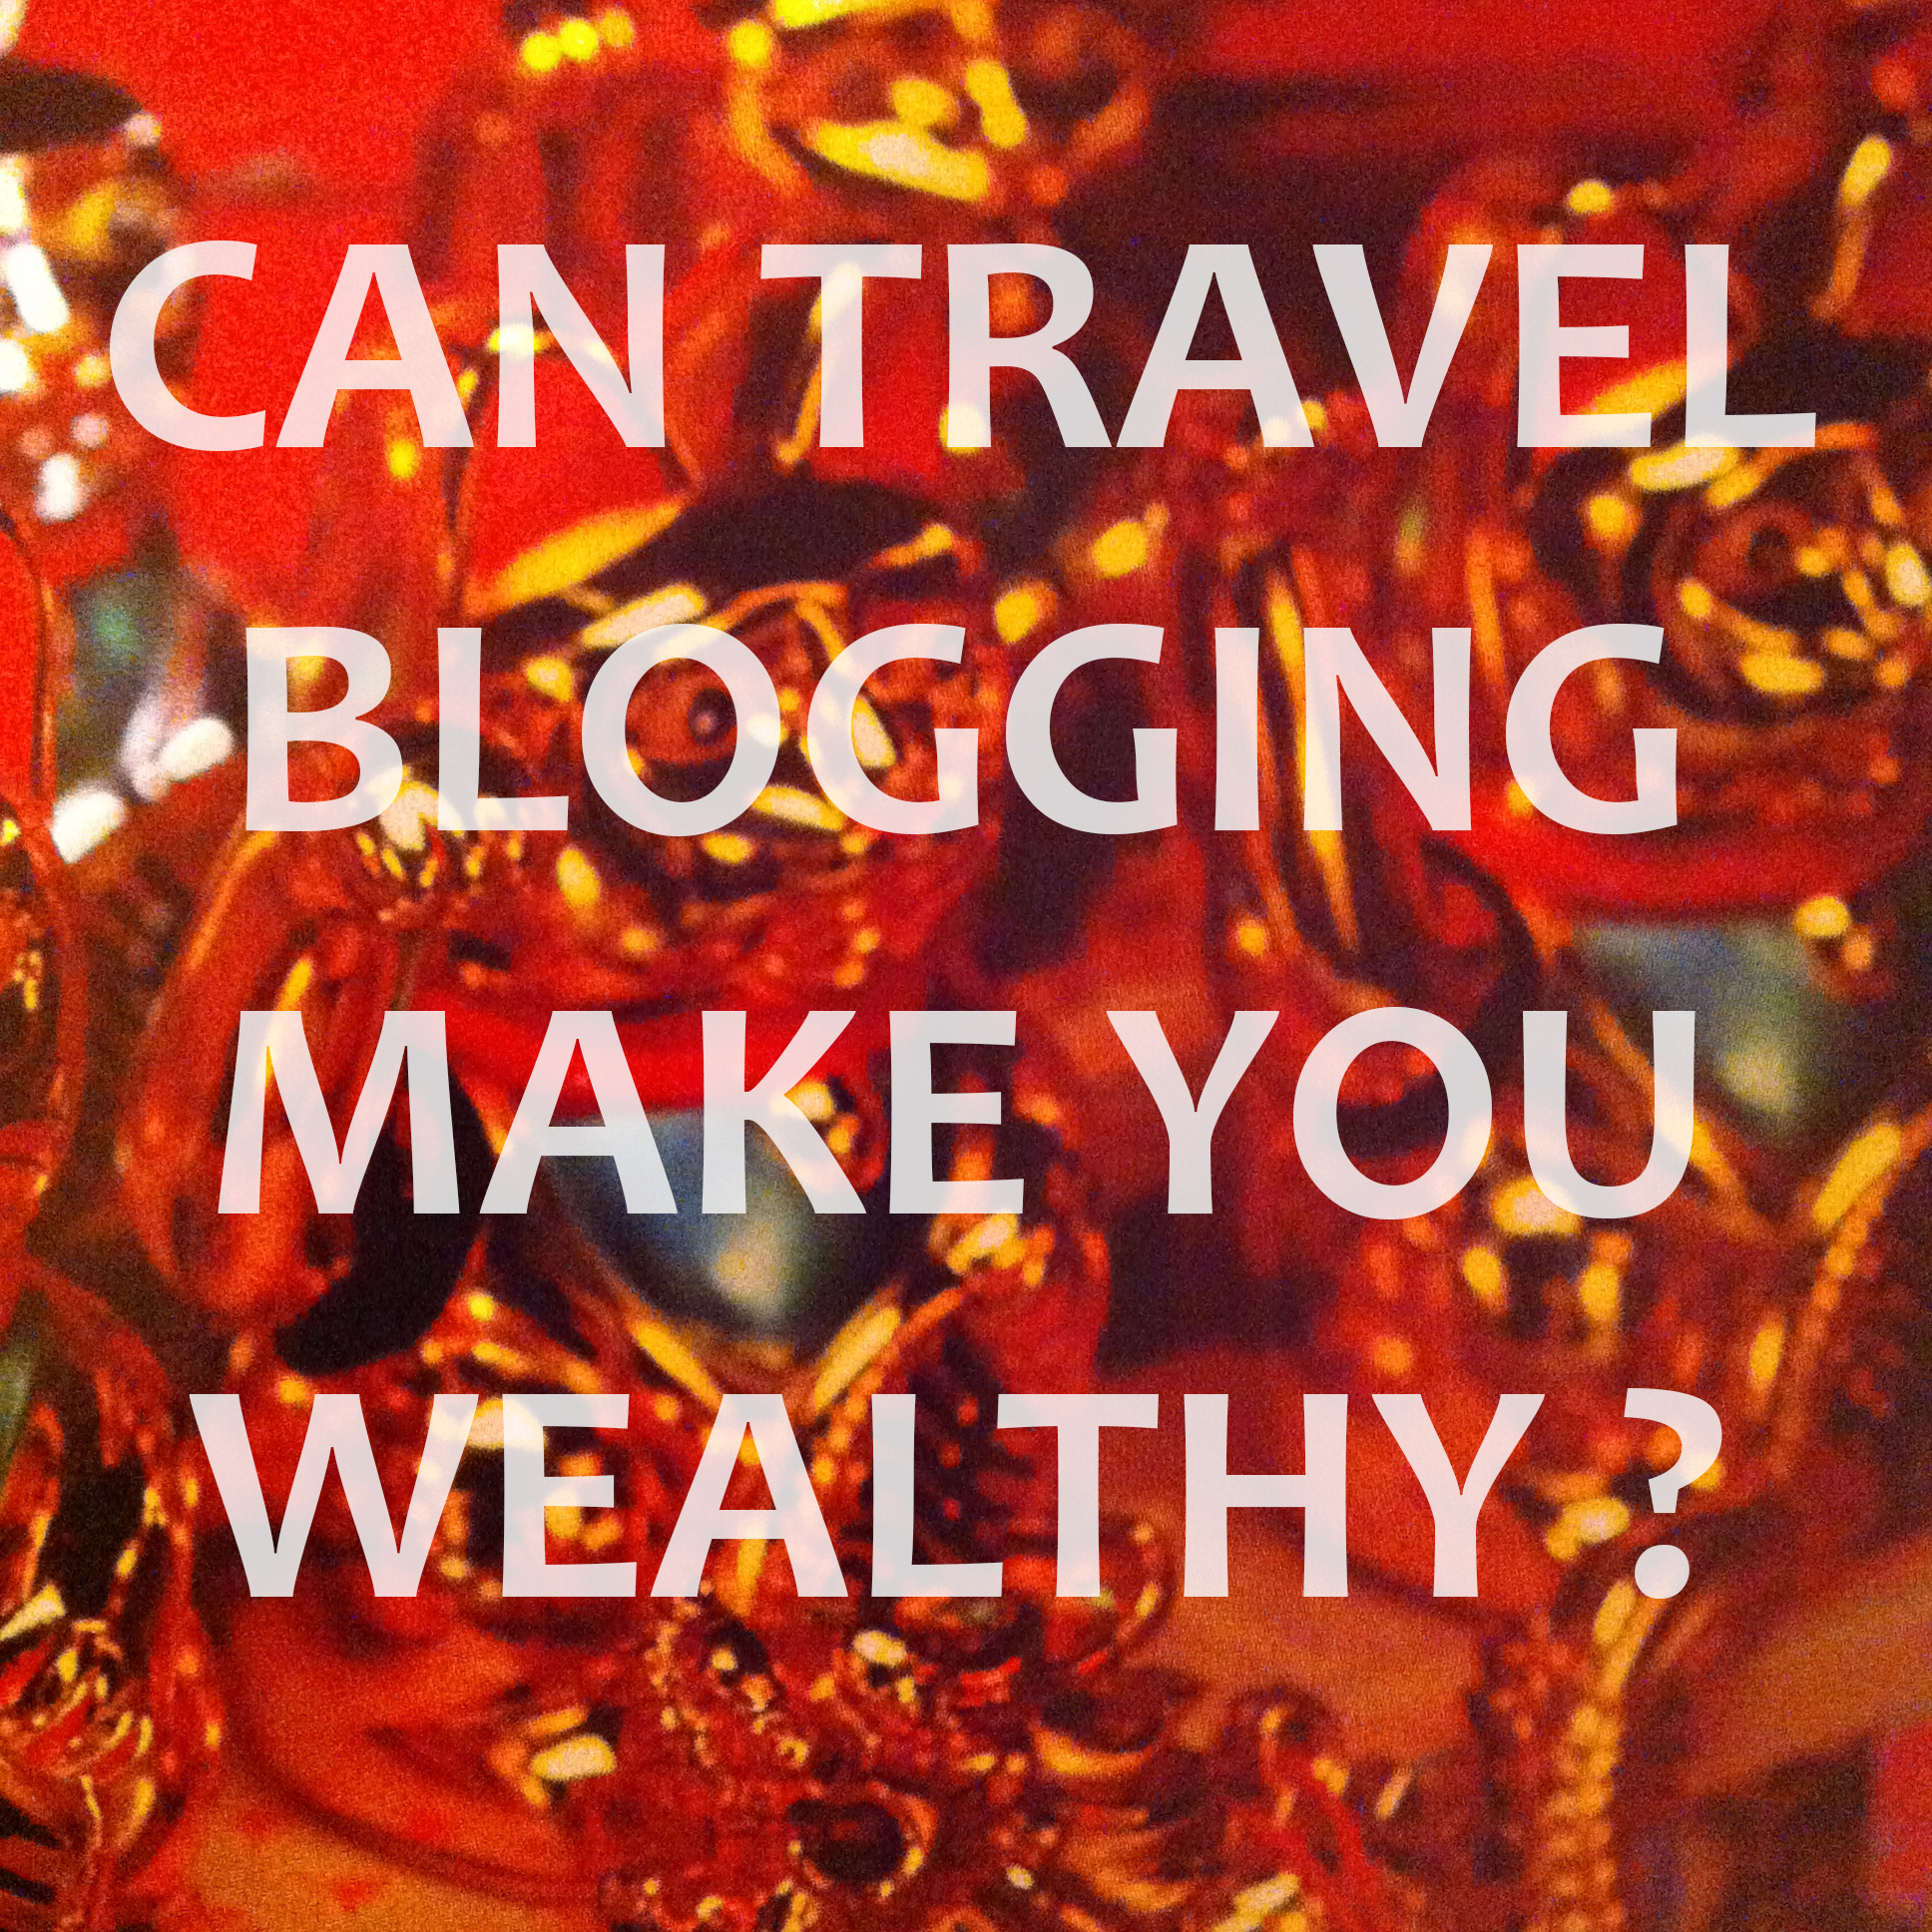 Can travel blogging make you wealthy?